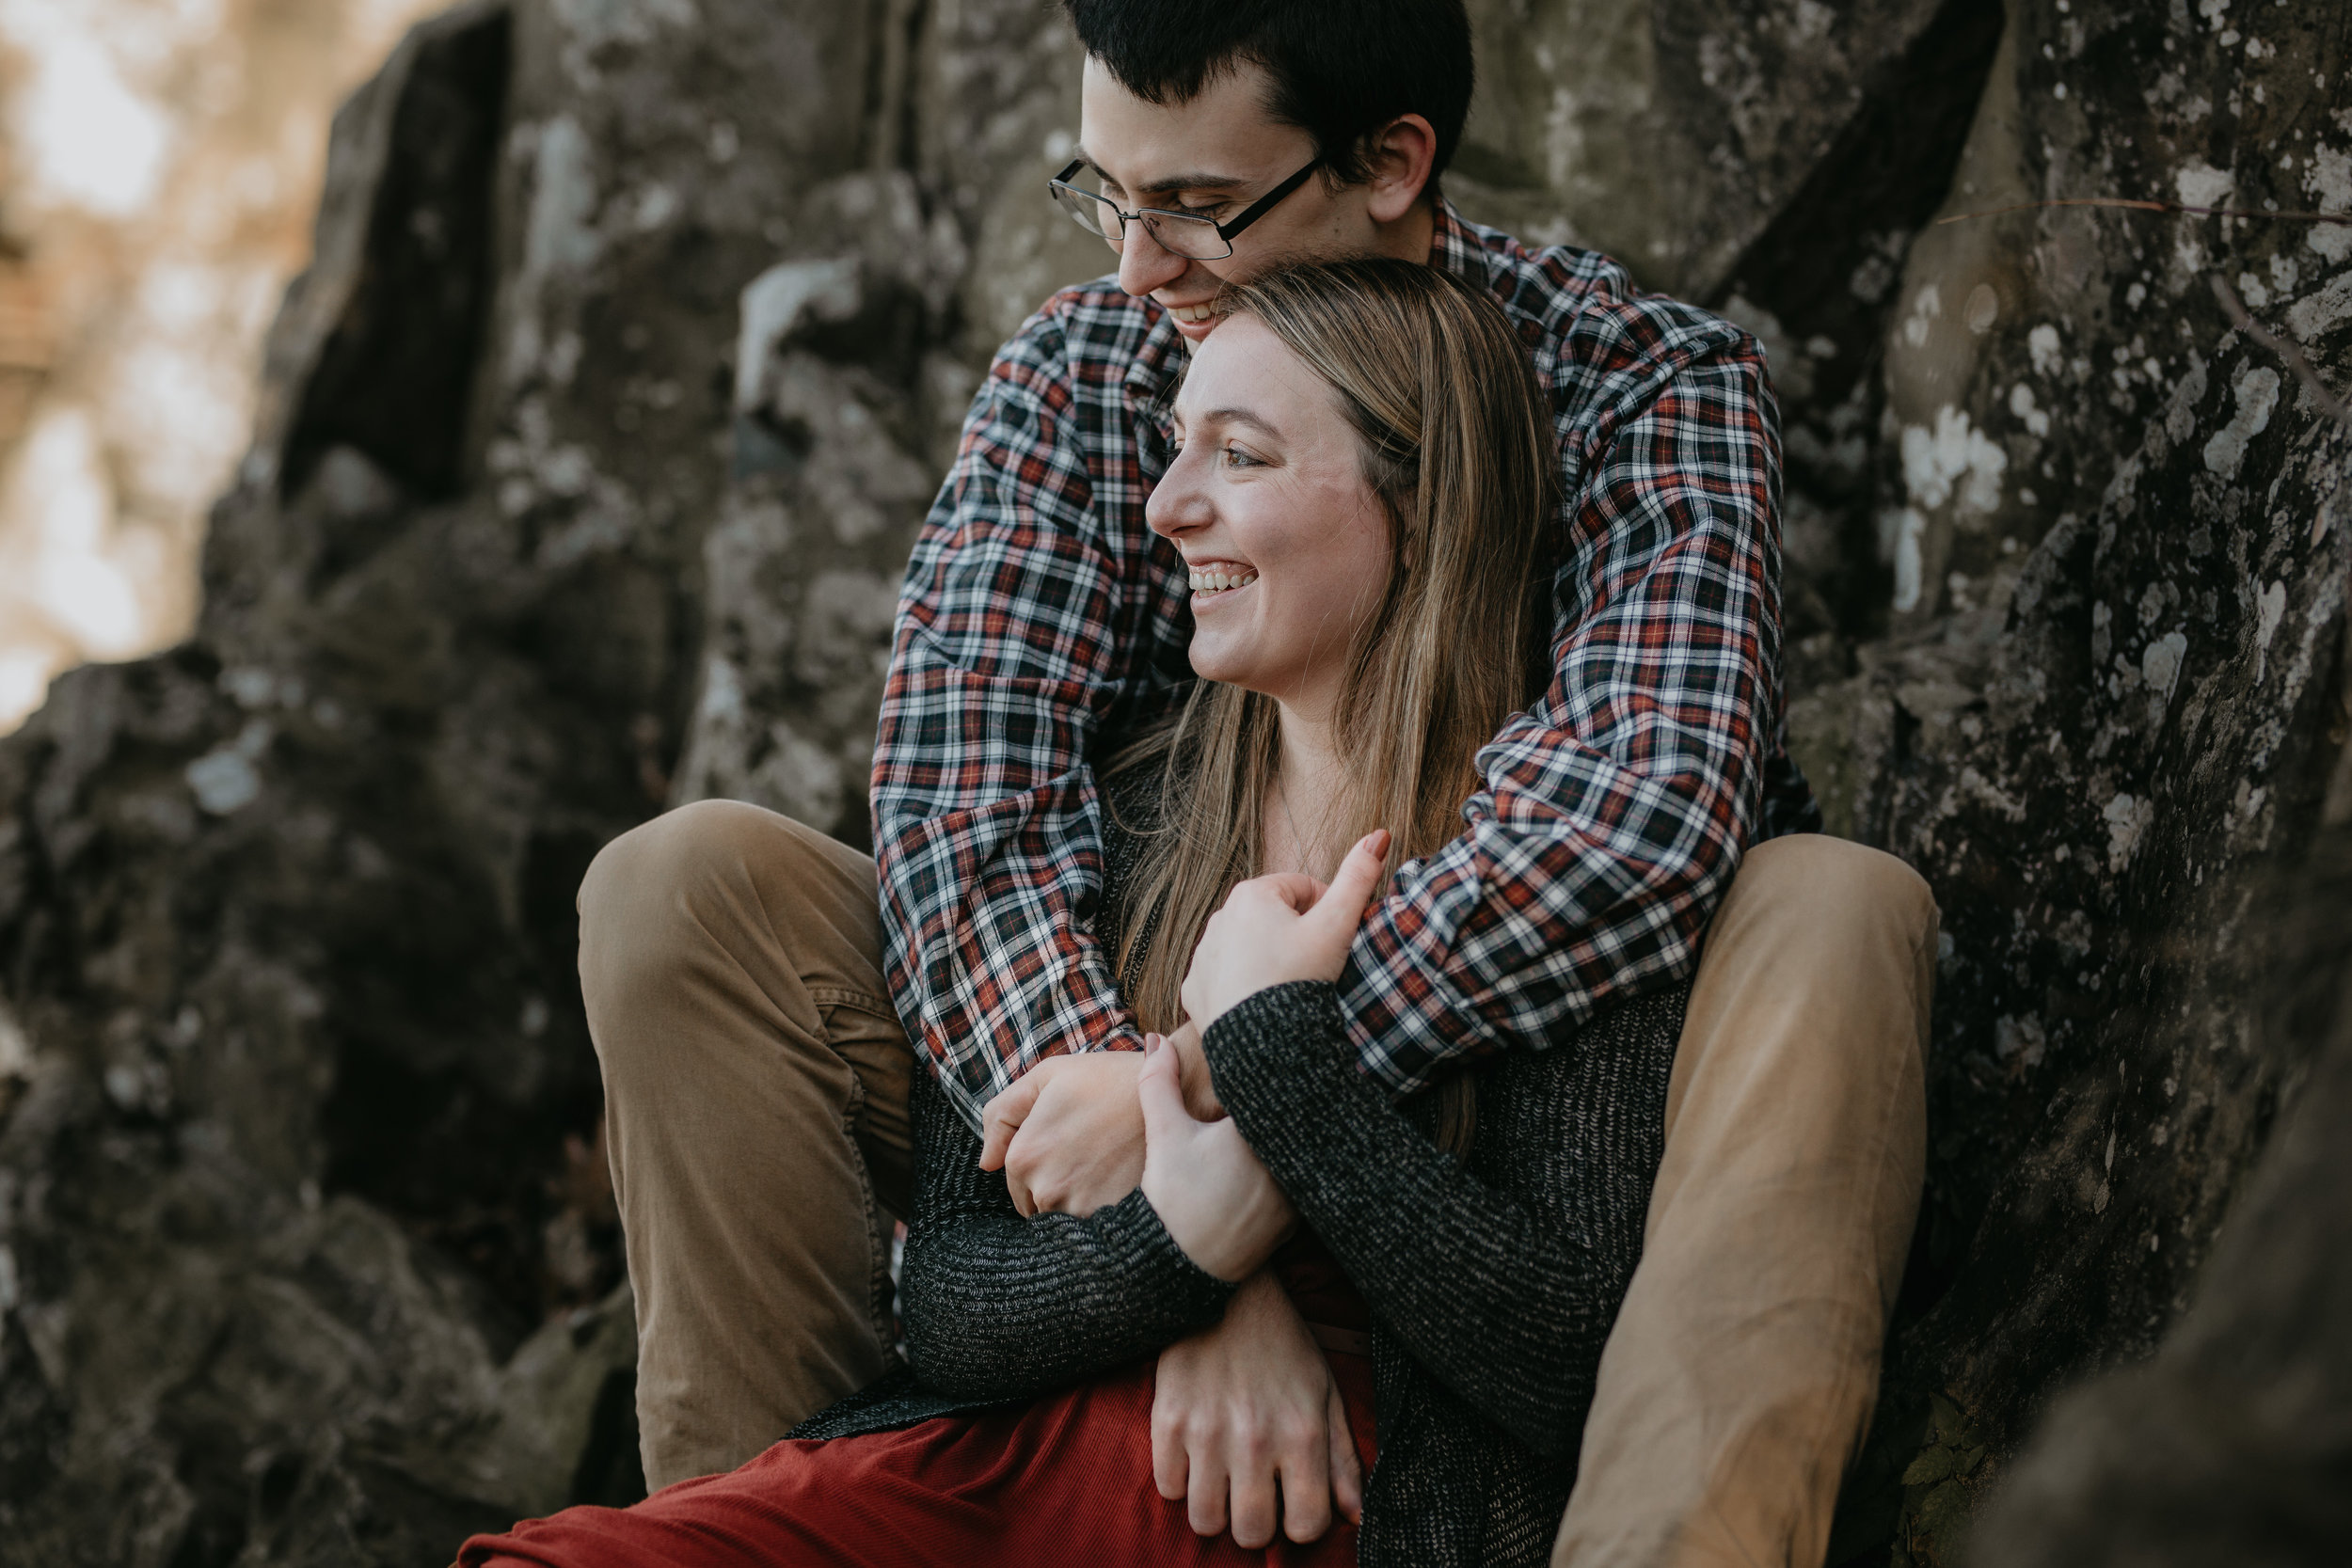 nicole-daacke-photography-shenandoah-national-park-adventure-engagement-session-with-fall-foliage-shenandoah-elopement-photographer-engagement-photos-in-virginia-charlottesville-national-park-adventure-elopement-photographer-3592.jpg